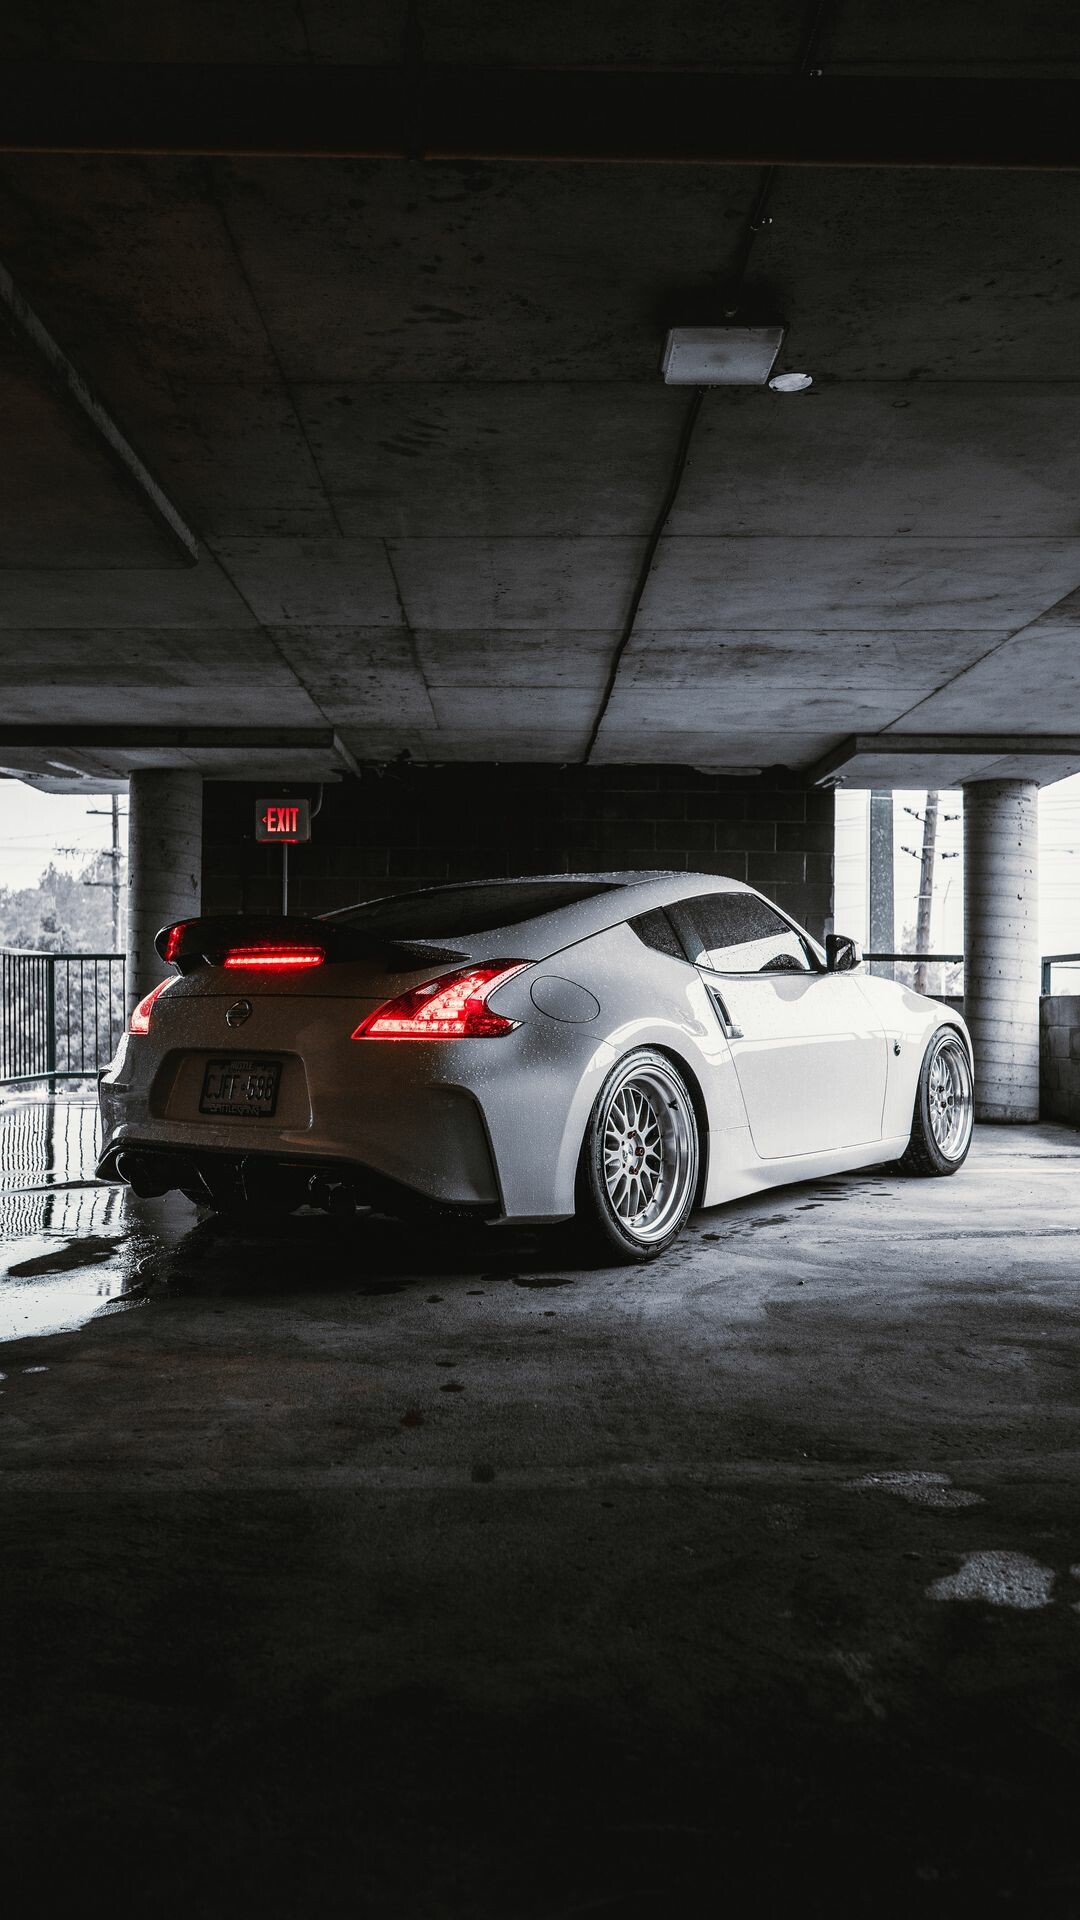 Nissan: 370Z, The sixth generation of the Z-car line. 1080x1920 Full HD Background.